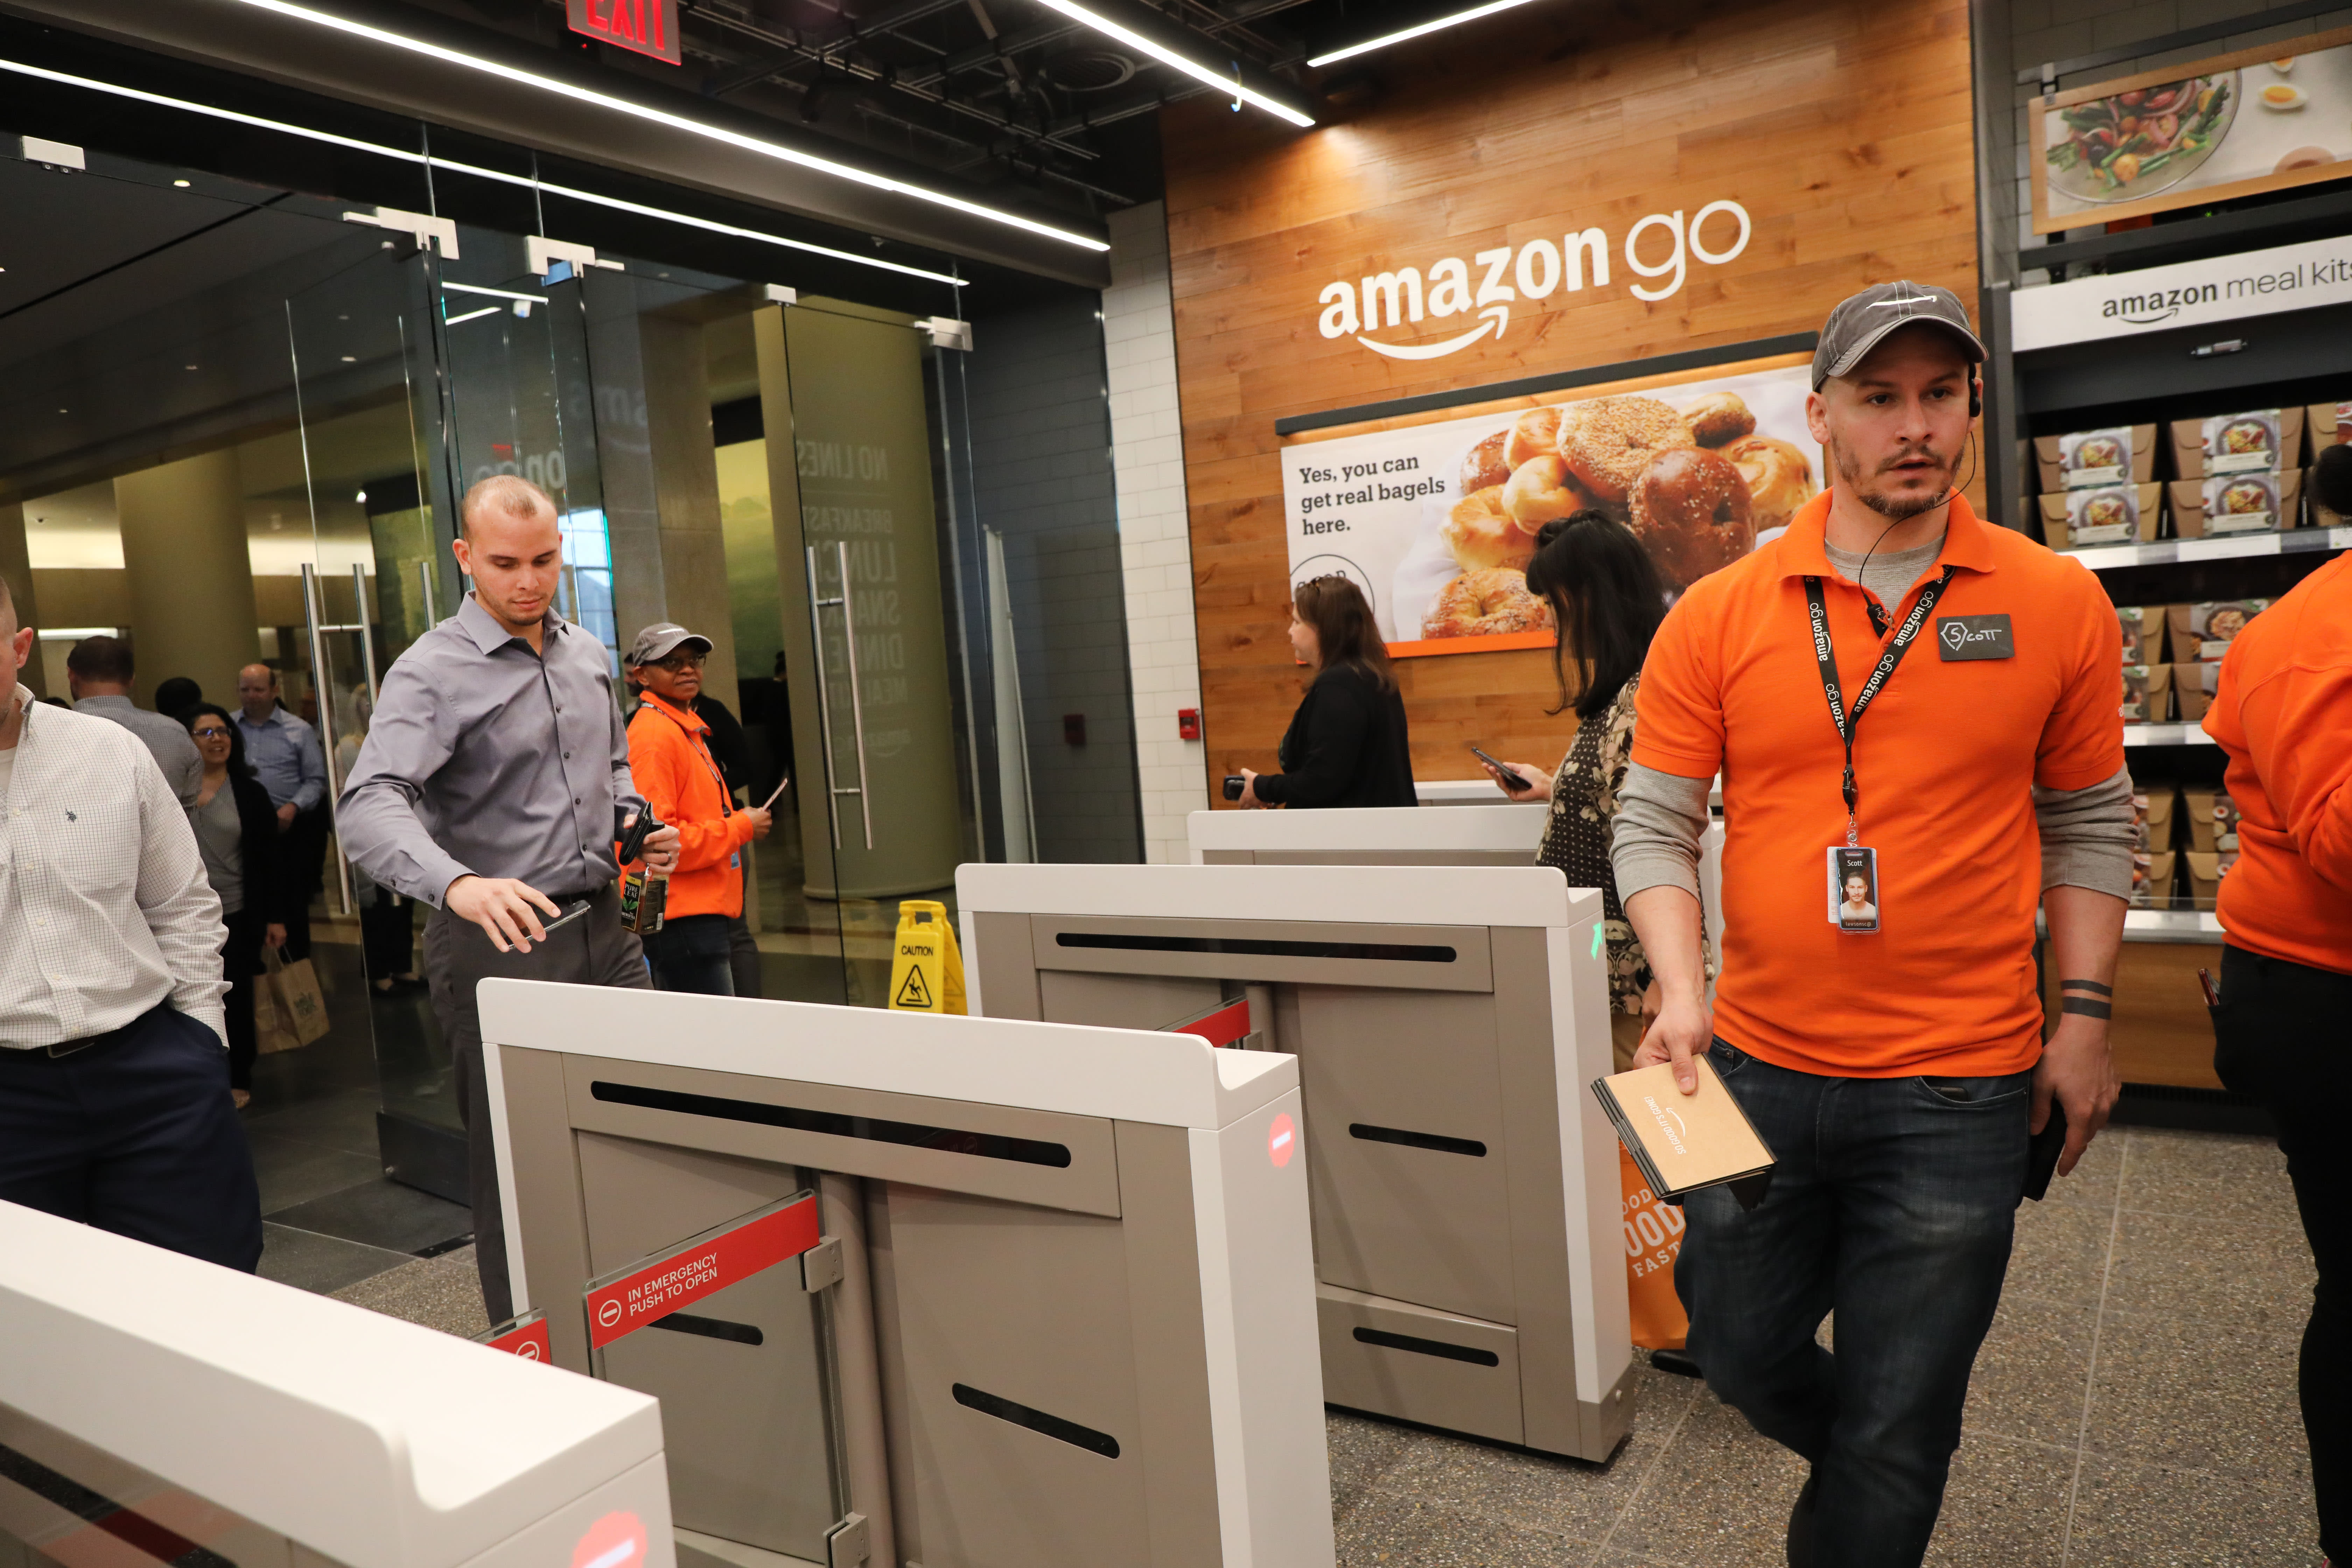 Amazon reportedly wants to turn your hand into a credit card